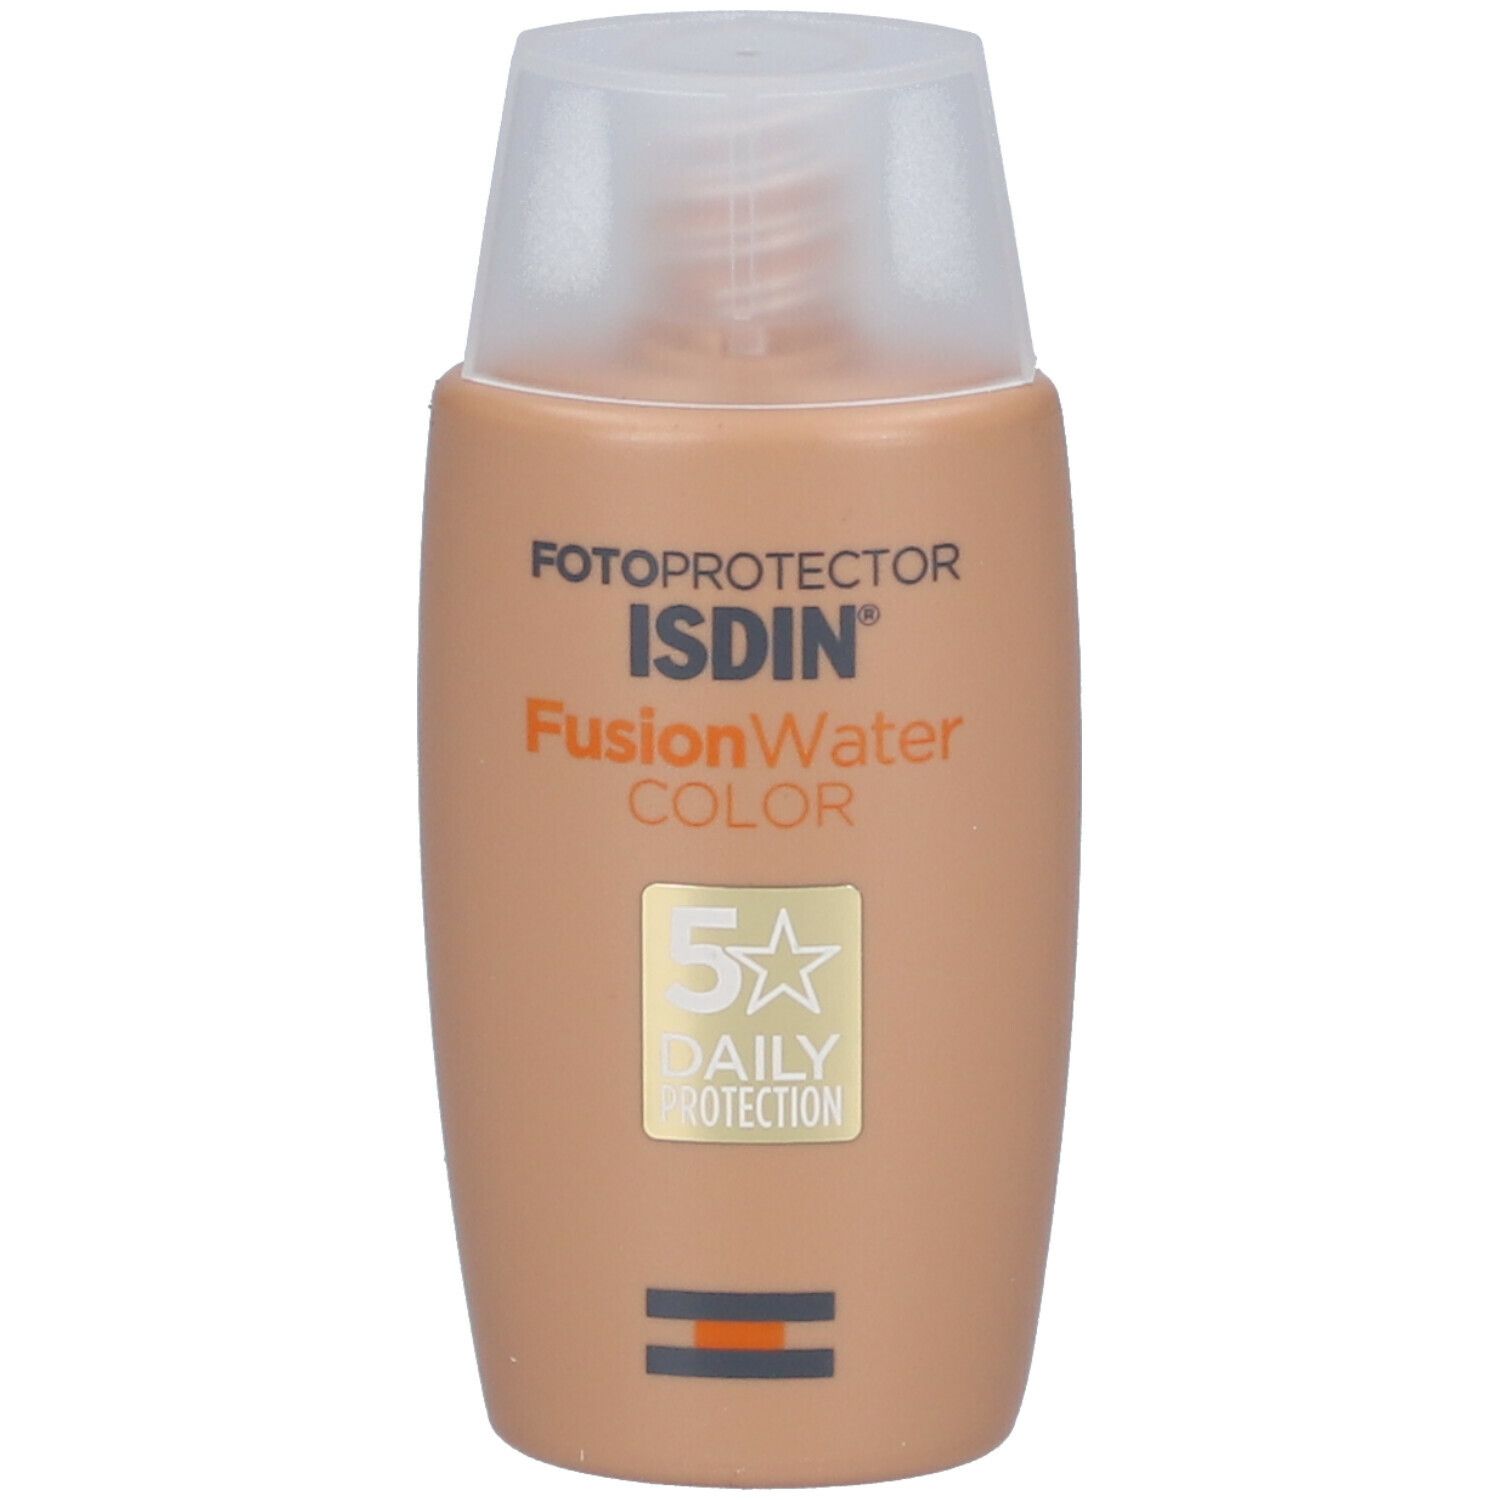 Fotoprotector ISDIN® Fusion Water Color Medium LSF 50